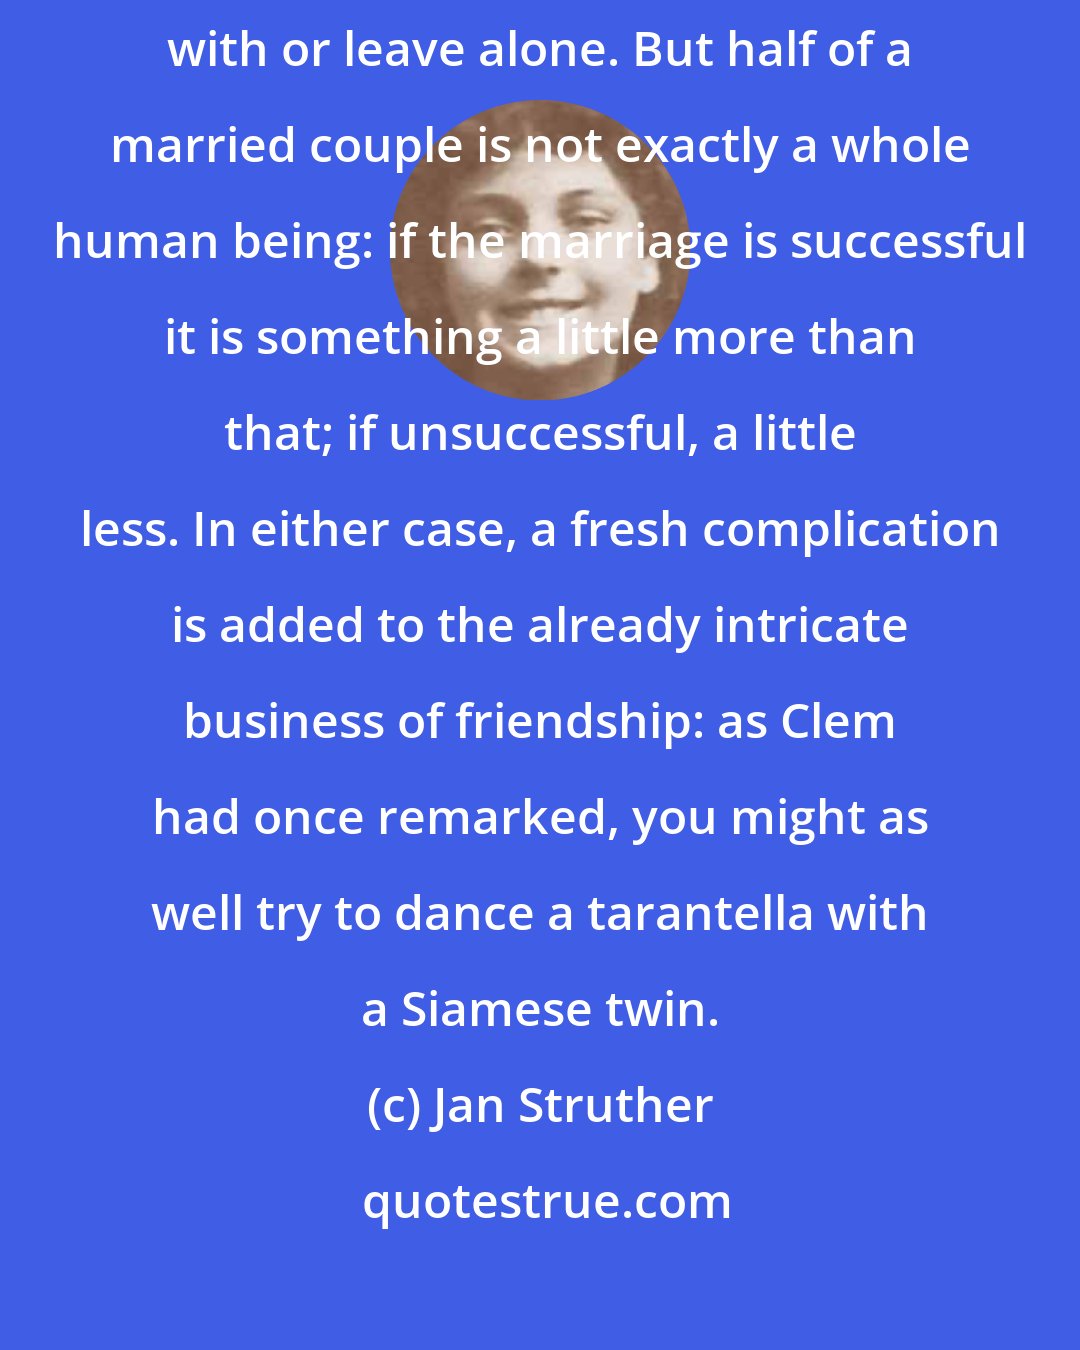 Jan Struther: A single person is a manageable entity, whom you can either make friends with or leave alone. But half of a married couple is not exactly a whole human being: if the marriage is successful it is something a little more than that; if unsuccessful, a little less. In either case, a fresh complication is added to the already intricate business of friendship: as Clem had once remarked, you might as well try to dance a tarantella with a Siamese twin.